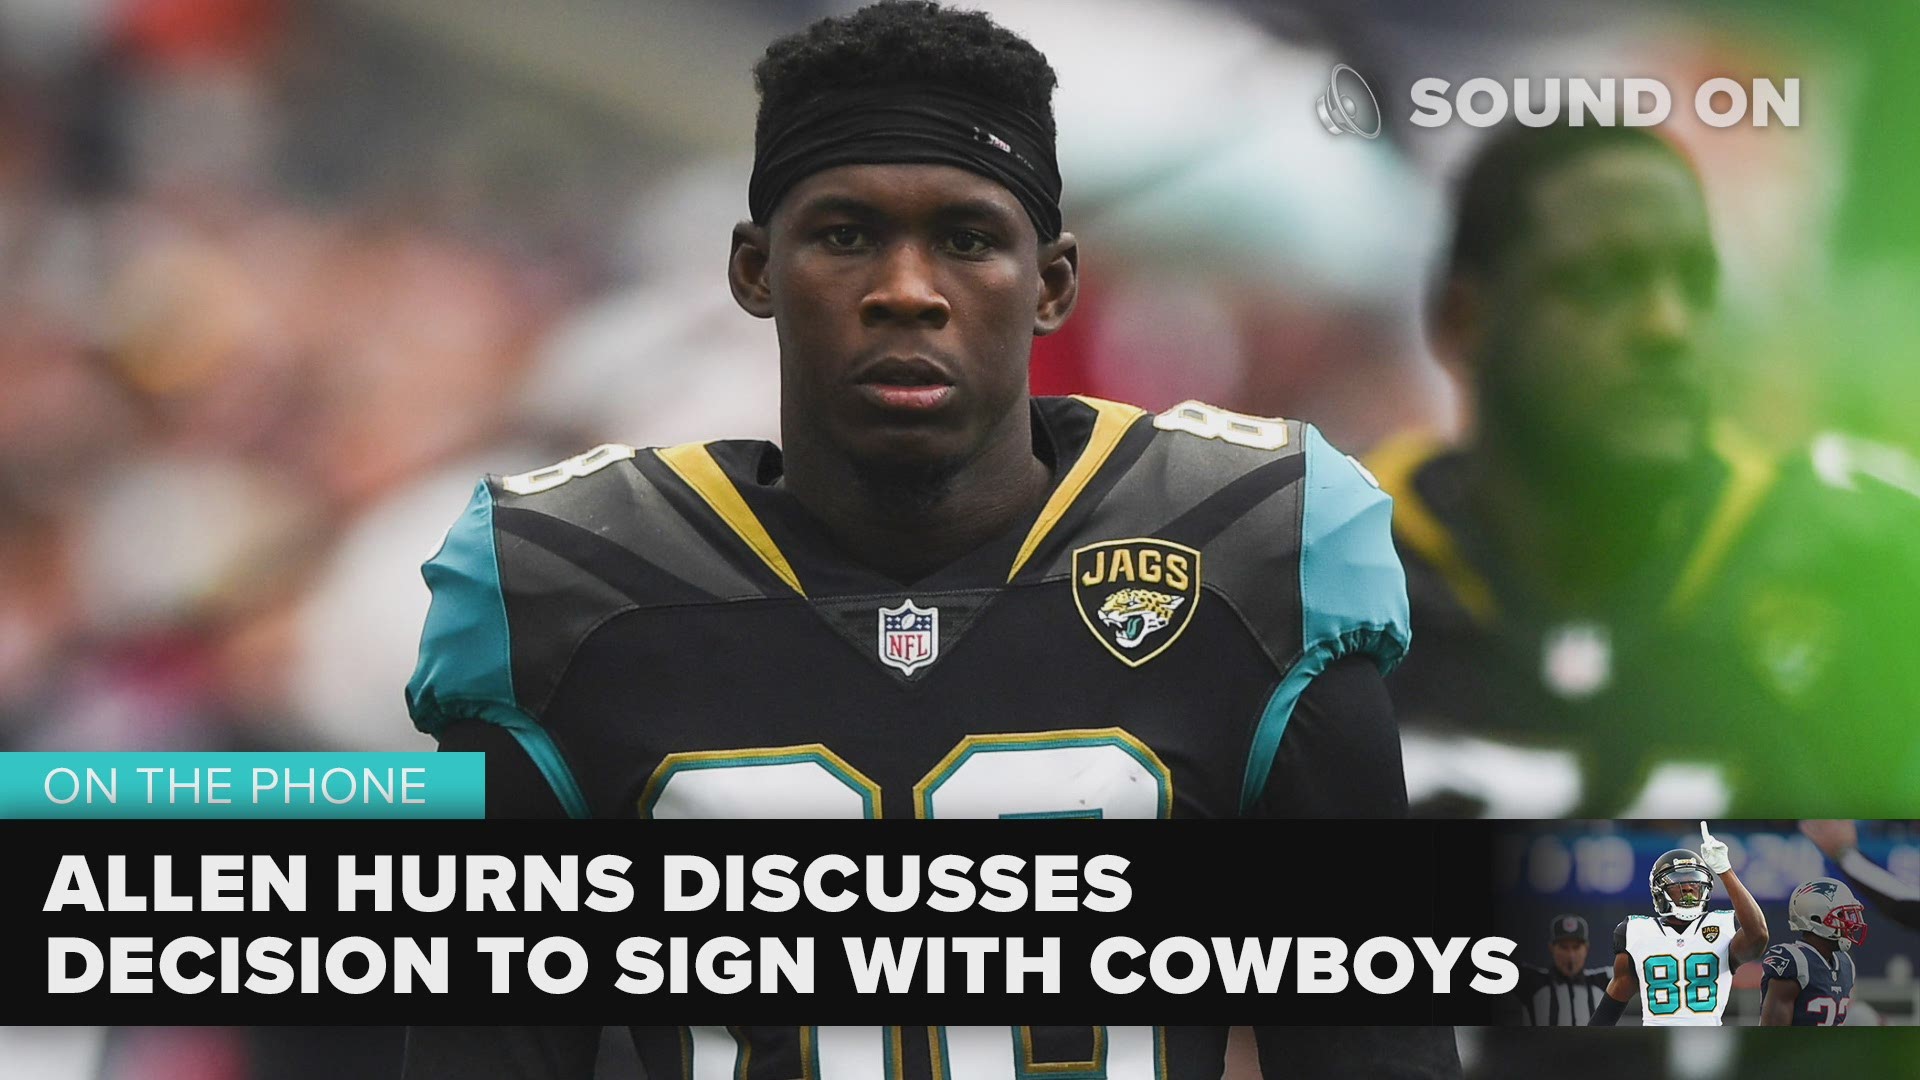 Hear from Allen Hurns, who spoke to WFAA Sports just hours after the announcement that he would sign with the Dallas Cowboys.